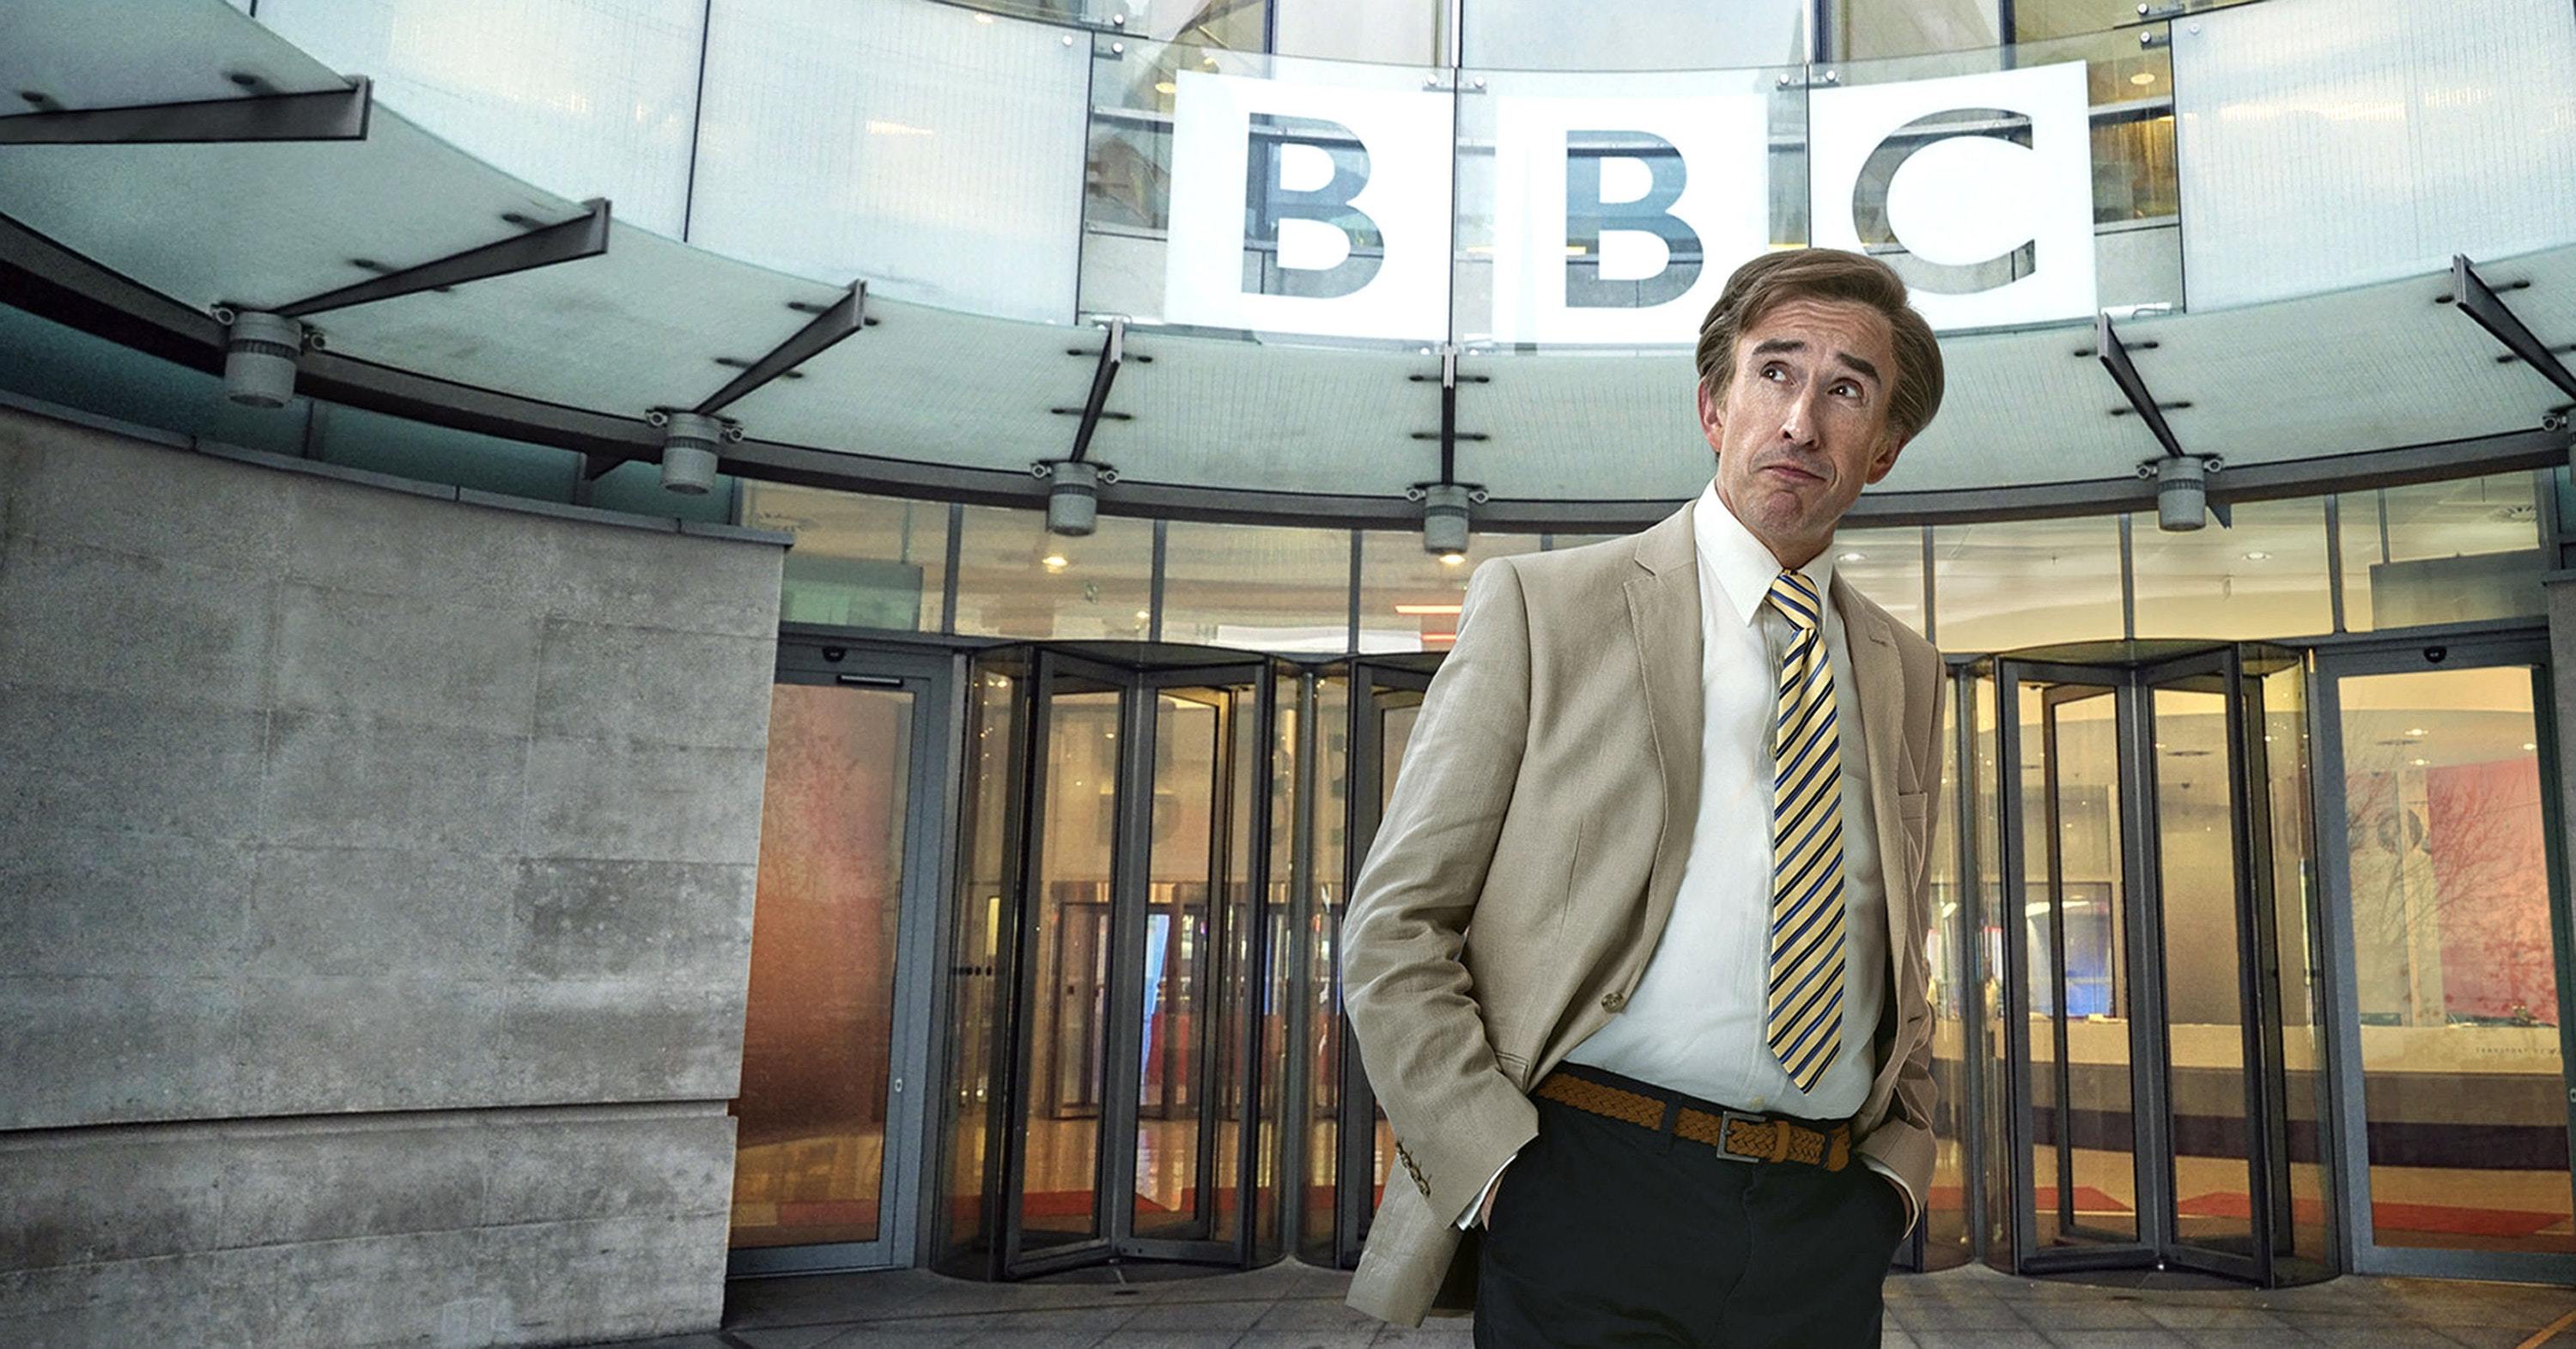 Alan Partridge will return for a new show (Andy Seymour/BBC/PA)